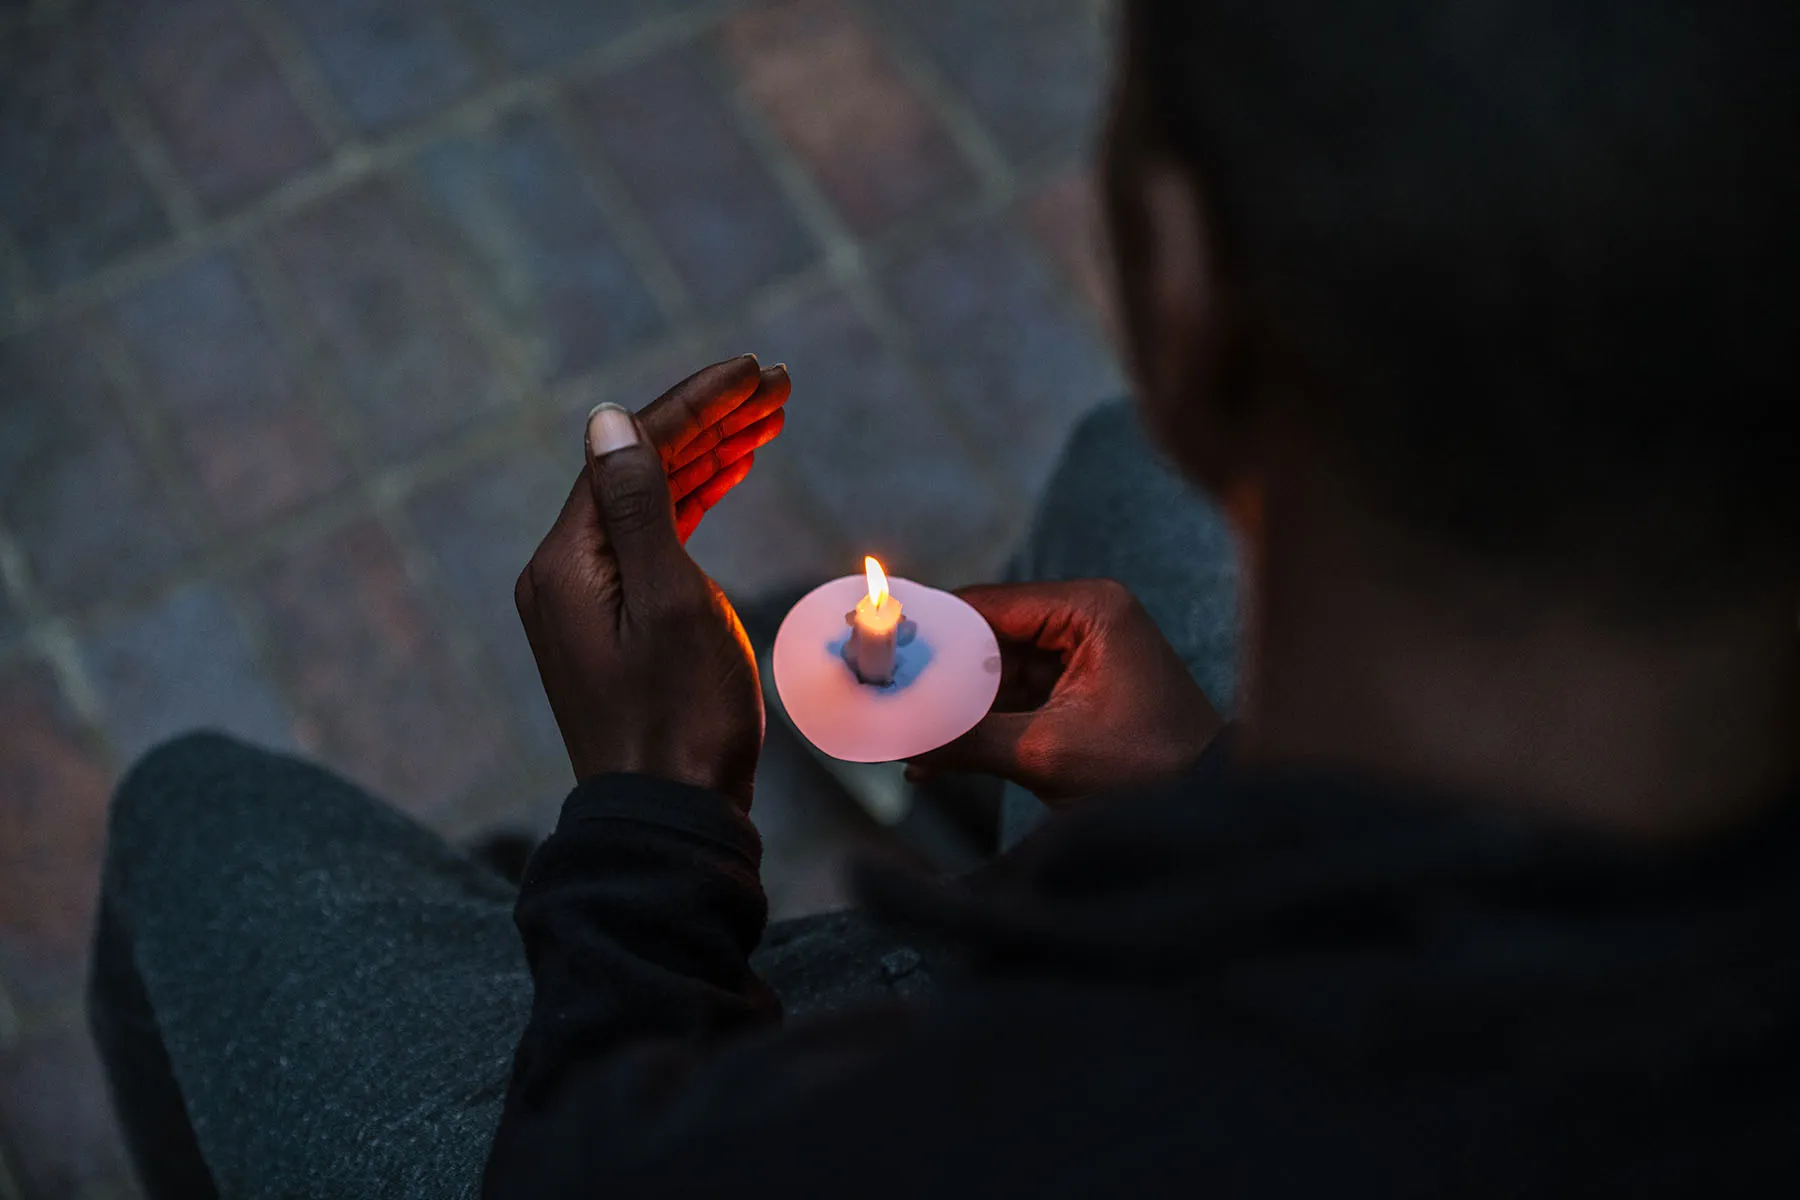 Demonstrators hold a candlelight vigil at the Breonna Taylor memorial at Jefferson Square Park.